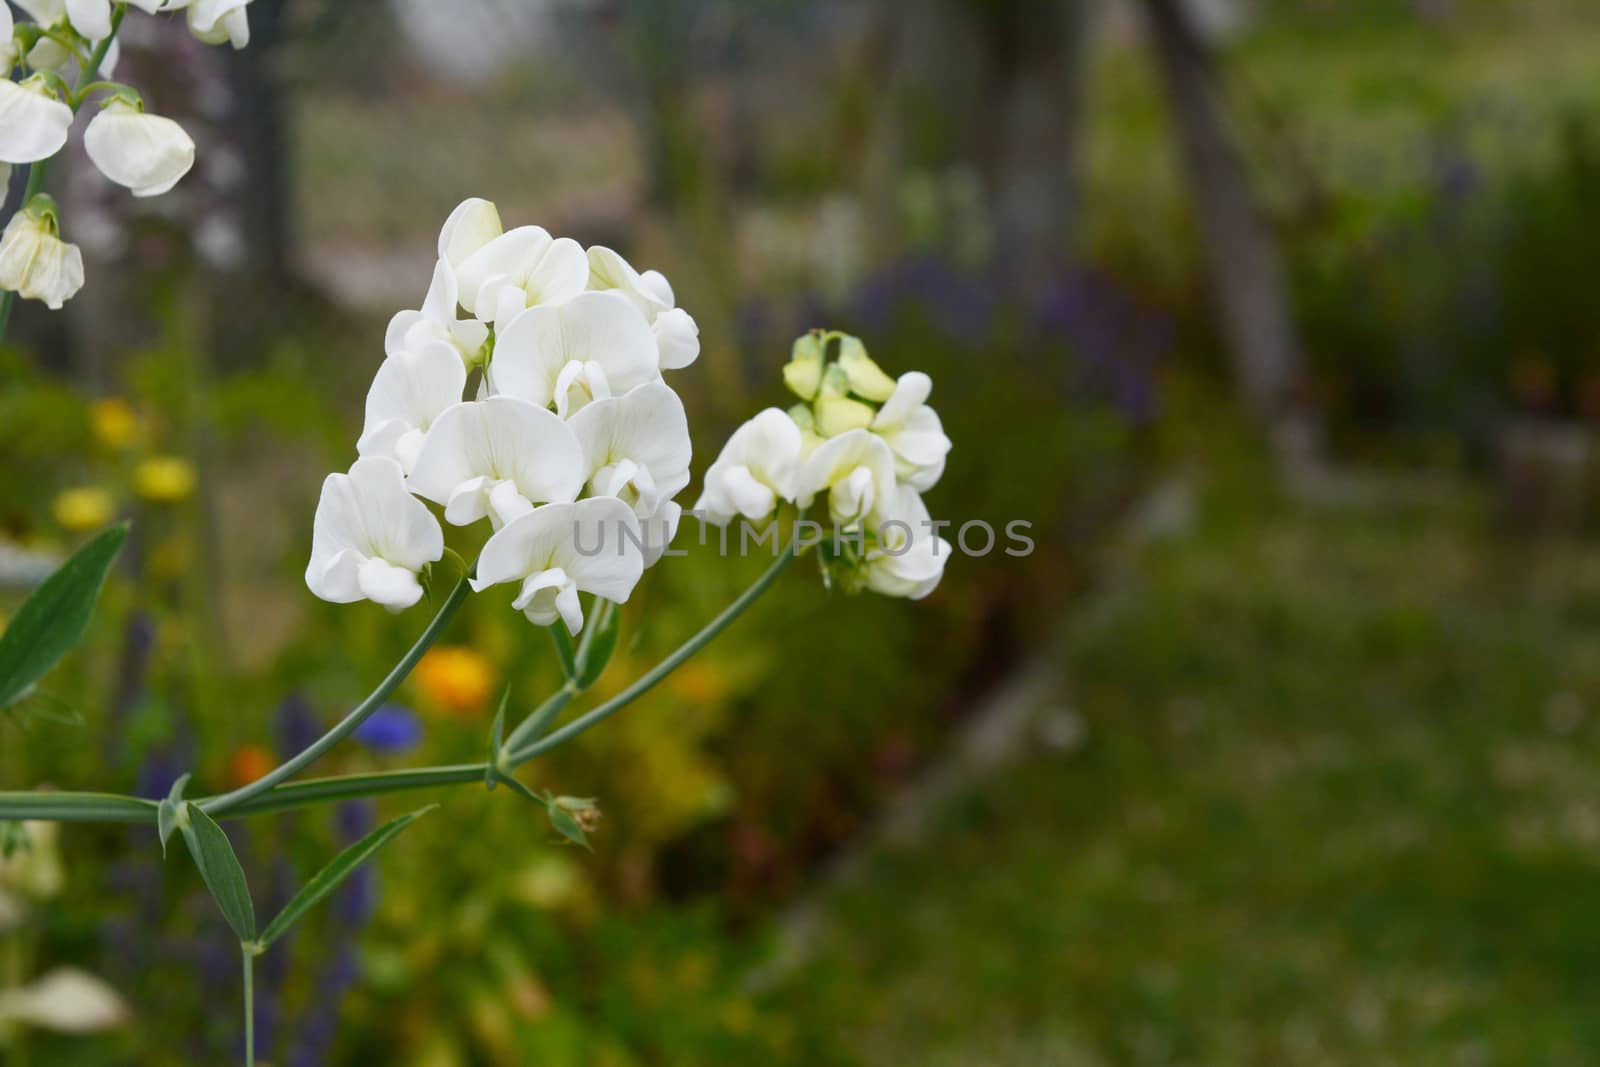 Pretty white everlasting pea flowers blooming in selective focus against a lush green garden